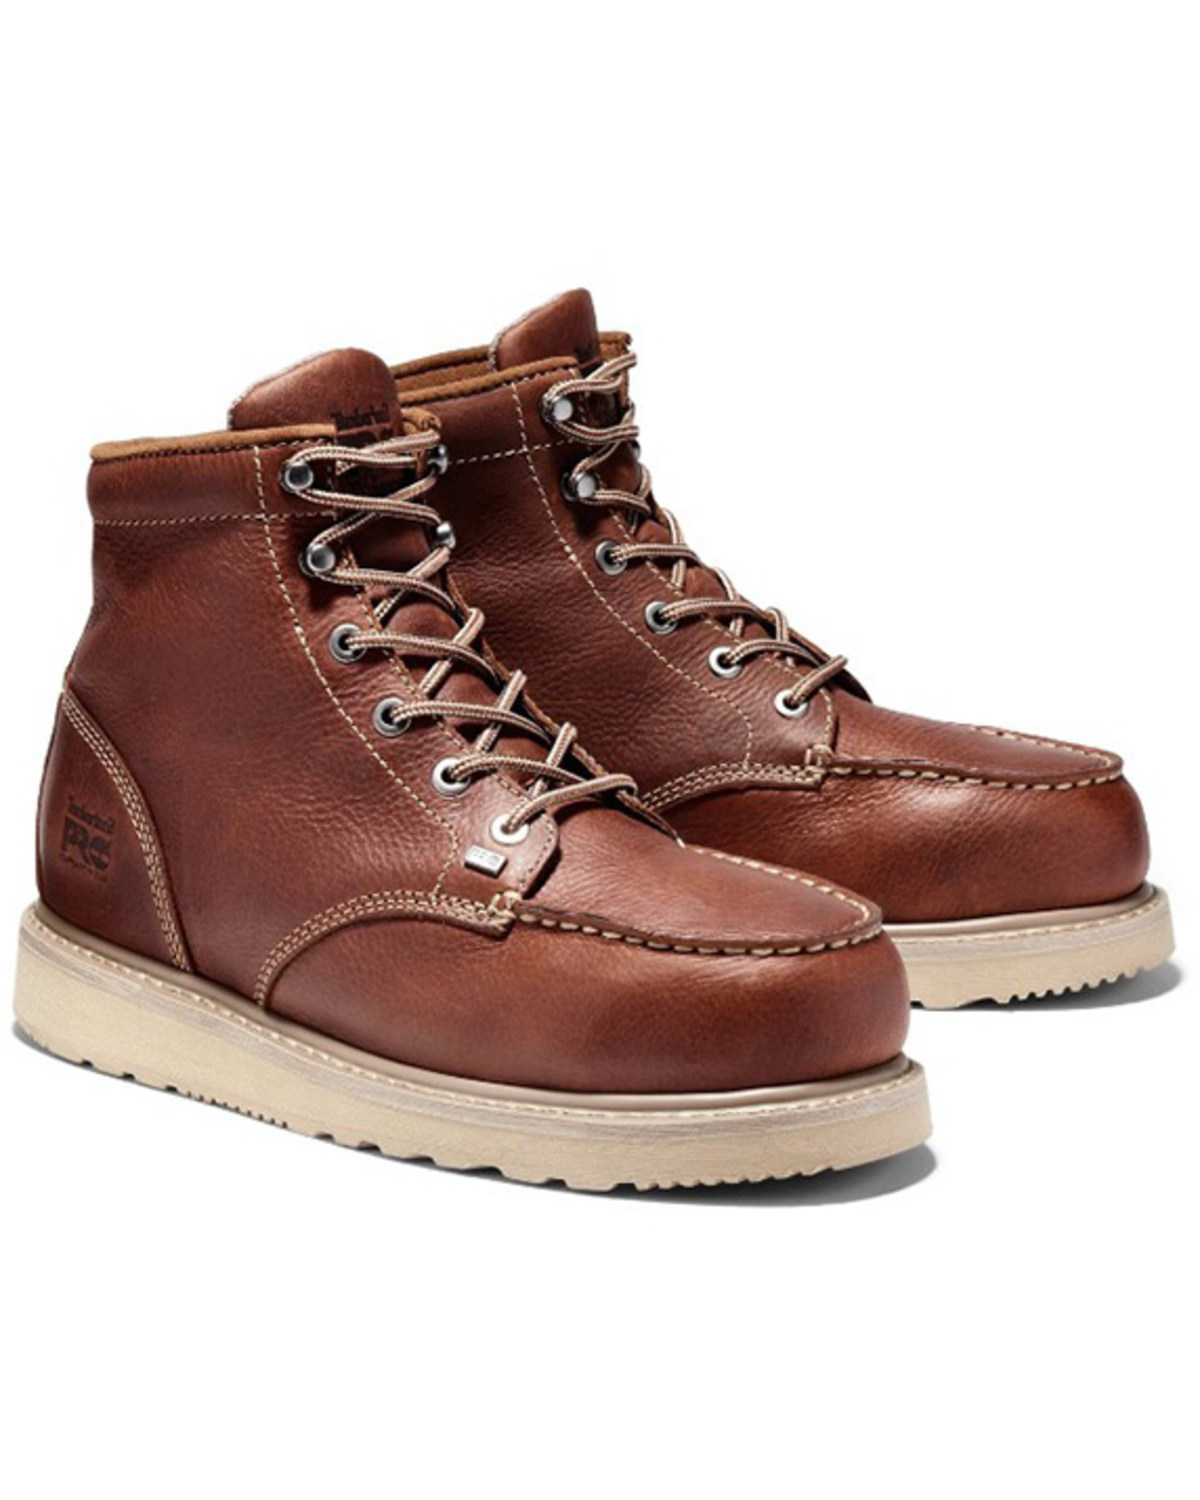 Timberland Men's 6" Barstow Work Boots - Alloy Toe